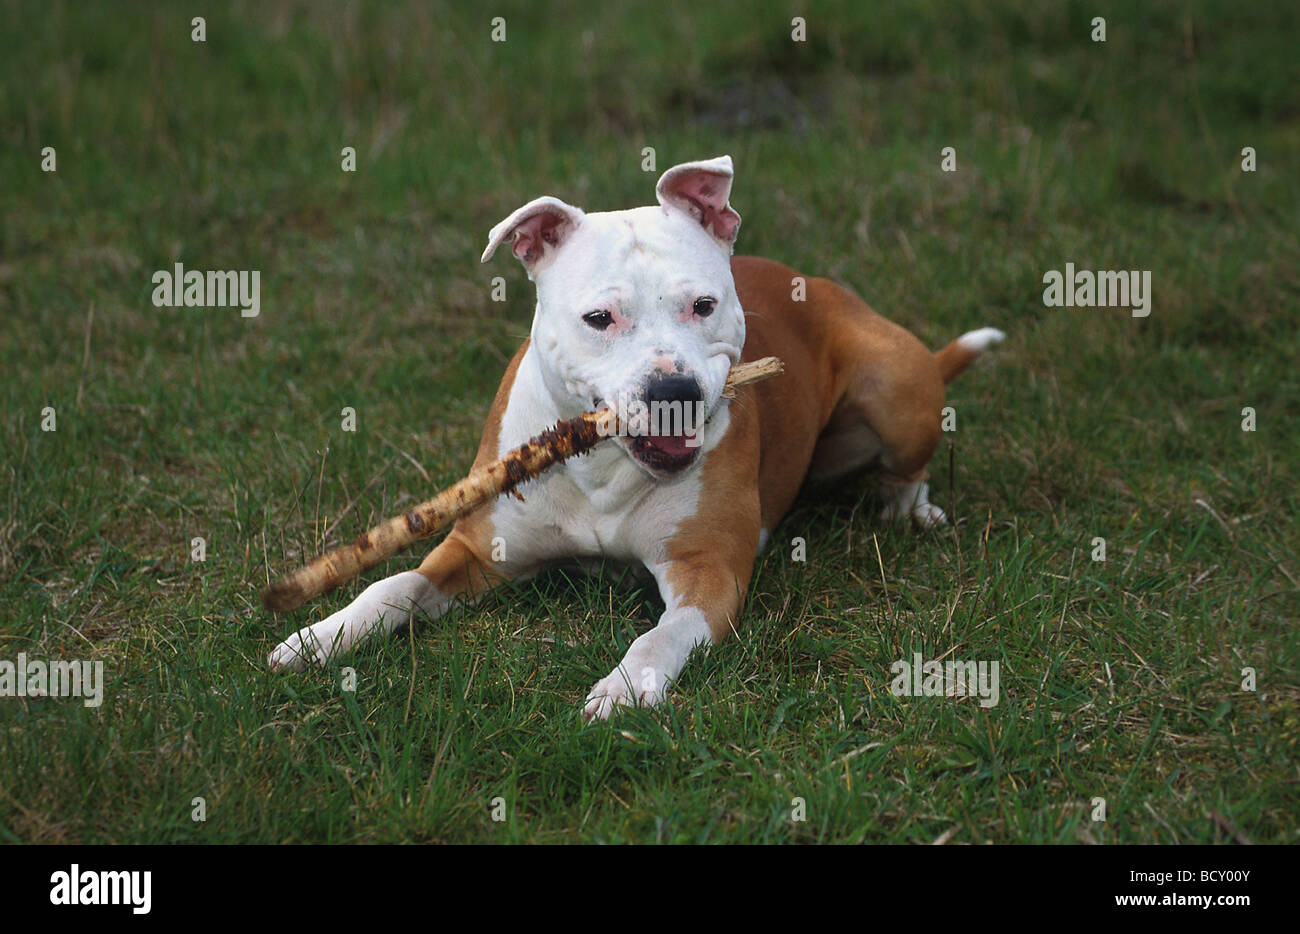 American Staffordshire Terrier / Pit Bull Terrier Stock Photo